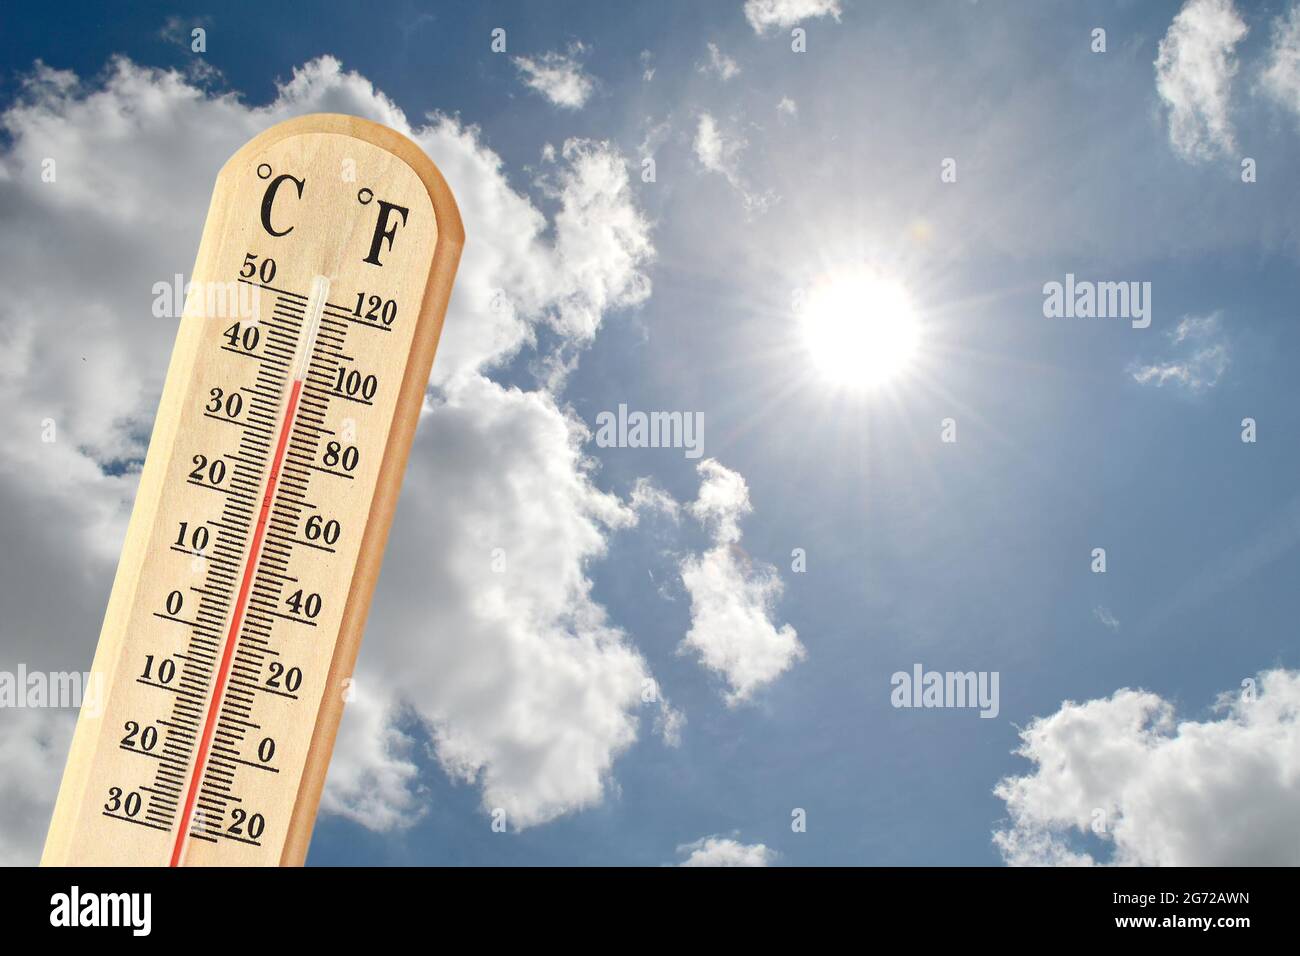 https://c8.alamy.com/comp/2G72AWN/thermometer-showing-high-temperature-summer-heat-concept-2G72AWN.jpg